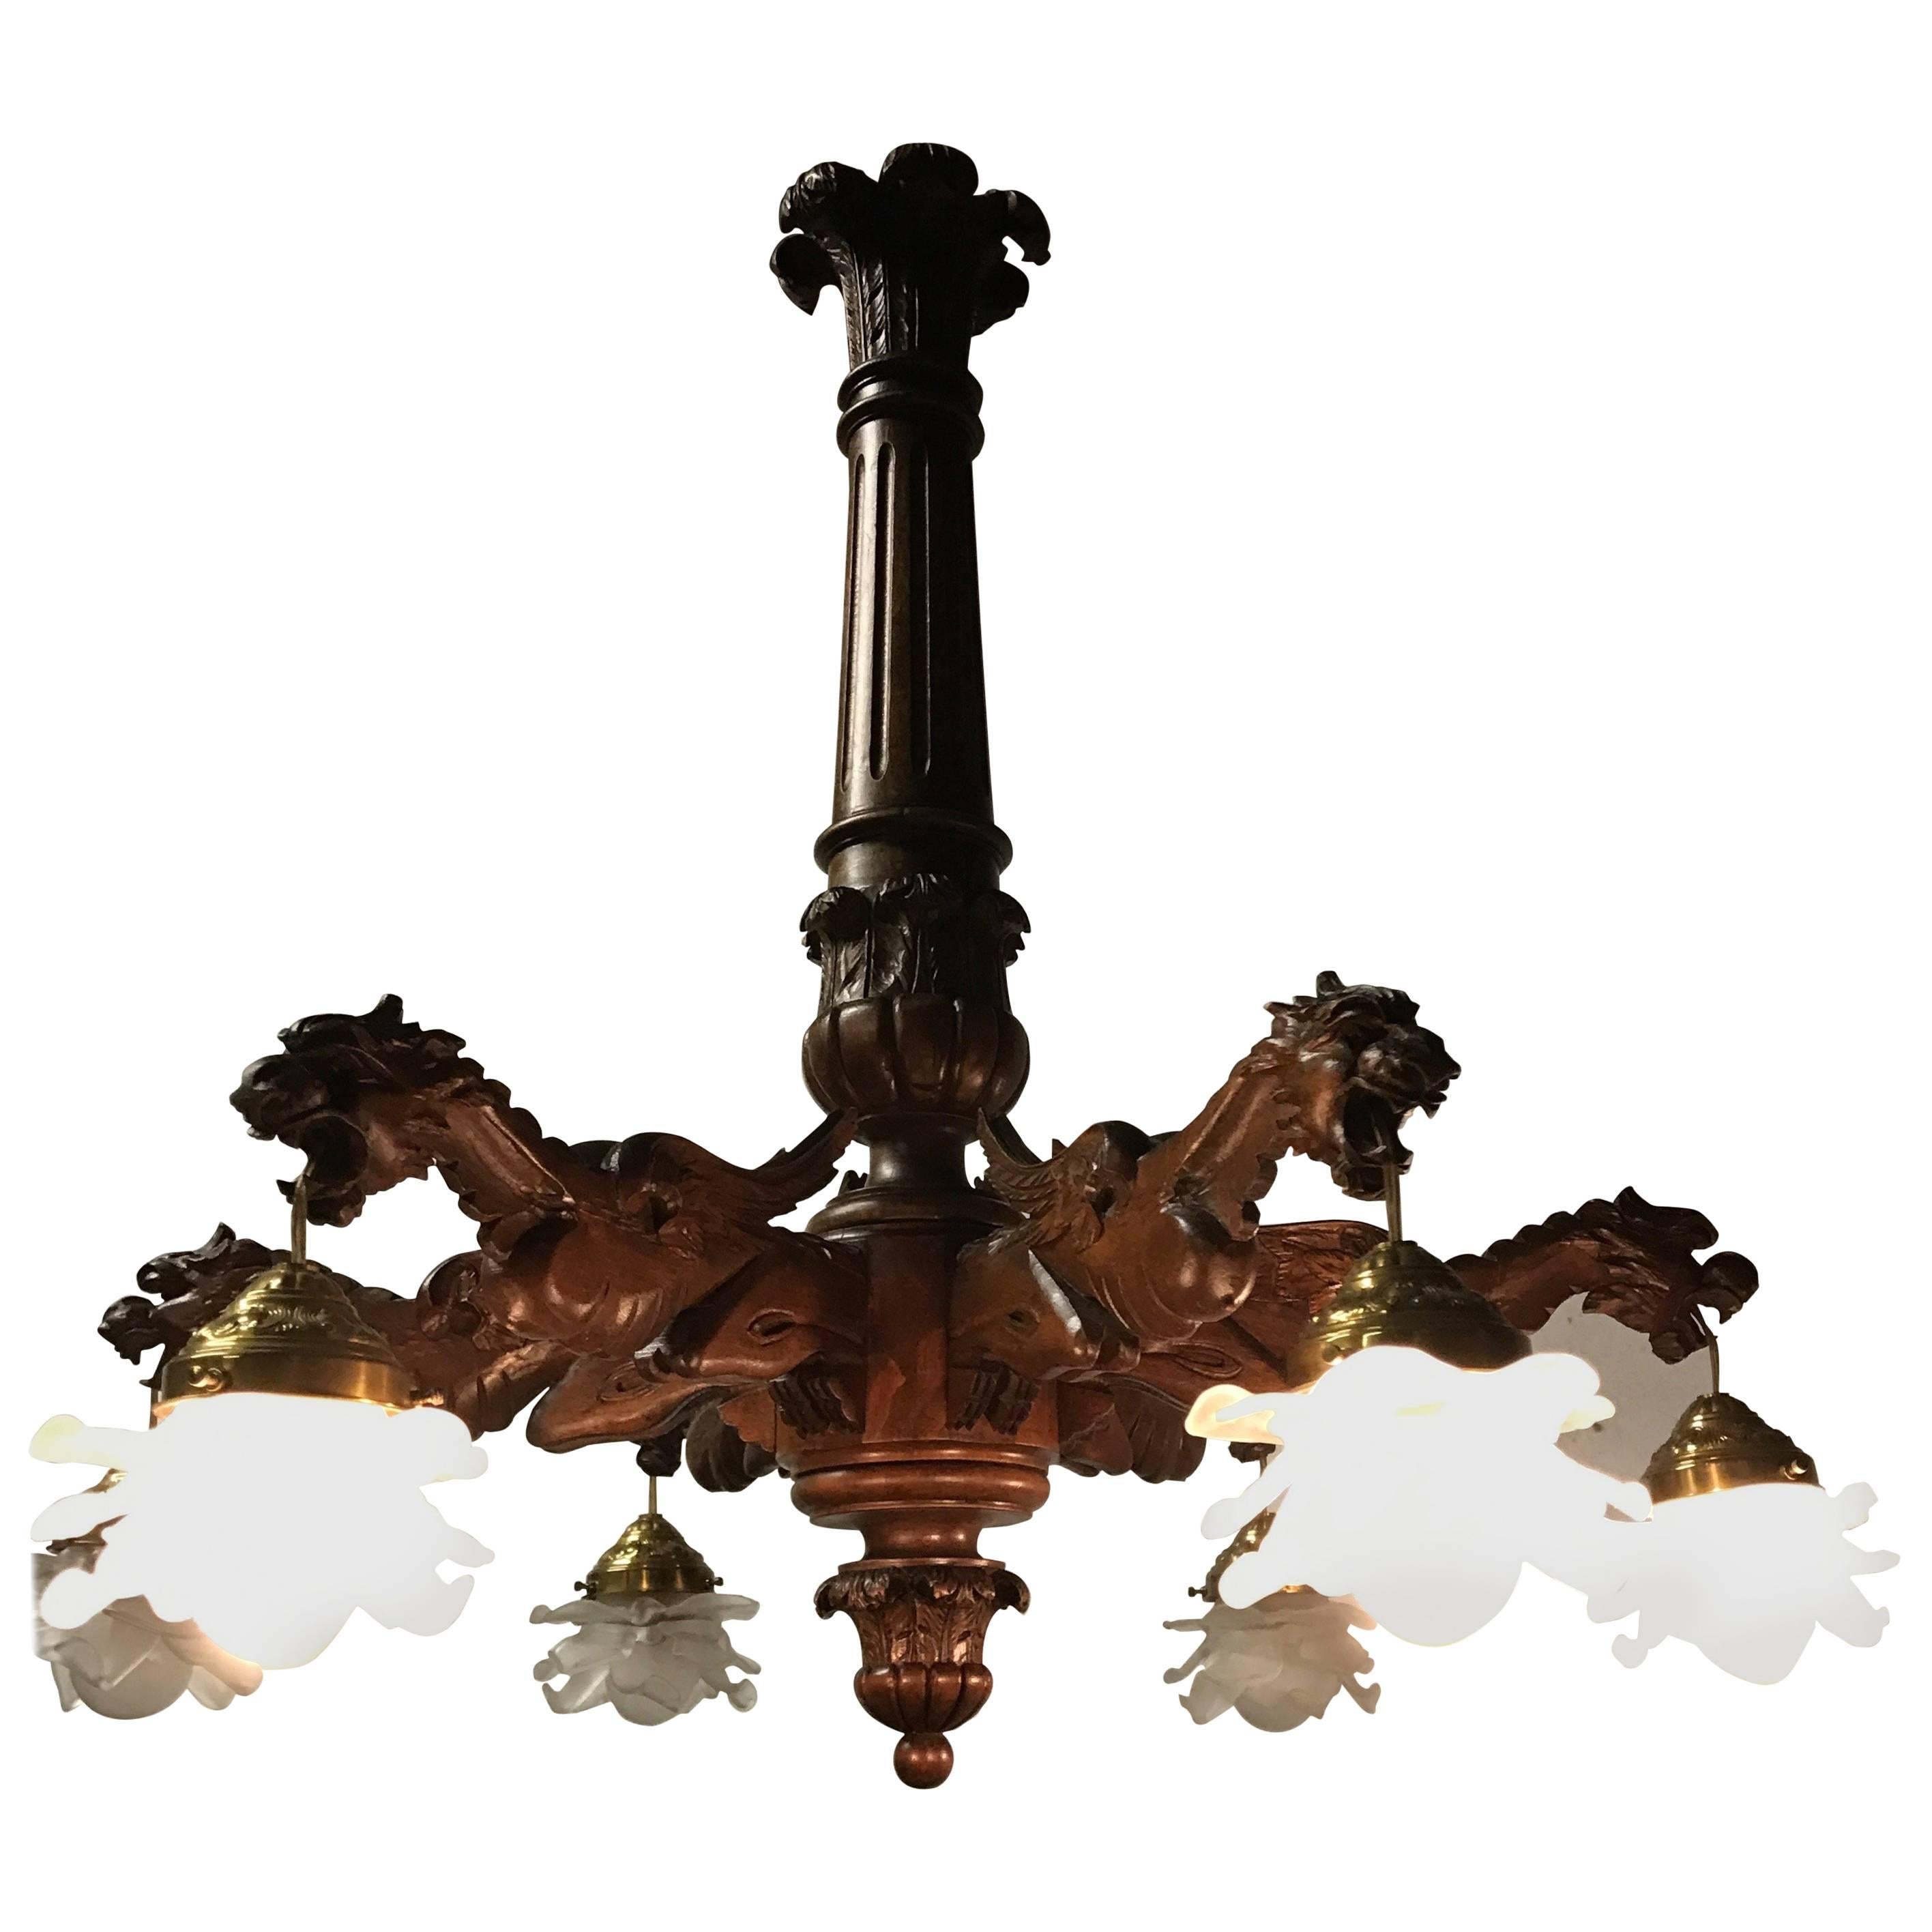  Stunning  Wooden Chandelier in Gothic or Medieval Style with Dragon Sculptures